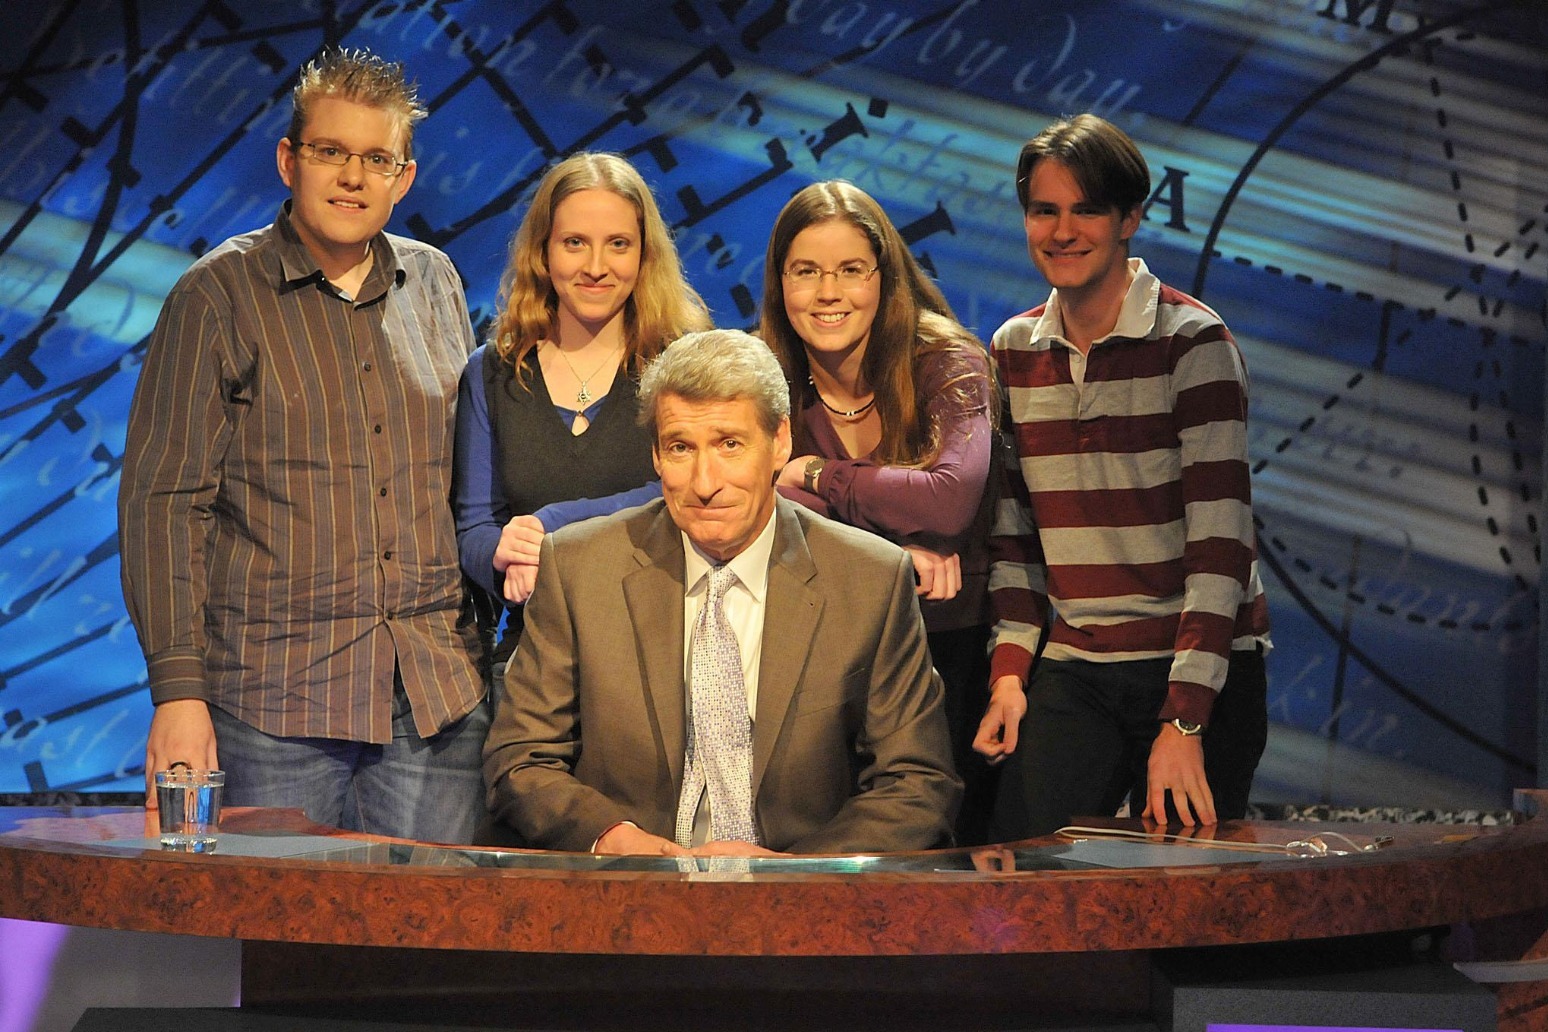 Jeremy Paxman stepping down as University Challenge host after nearly three decades